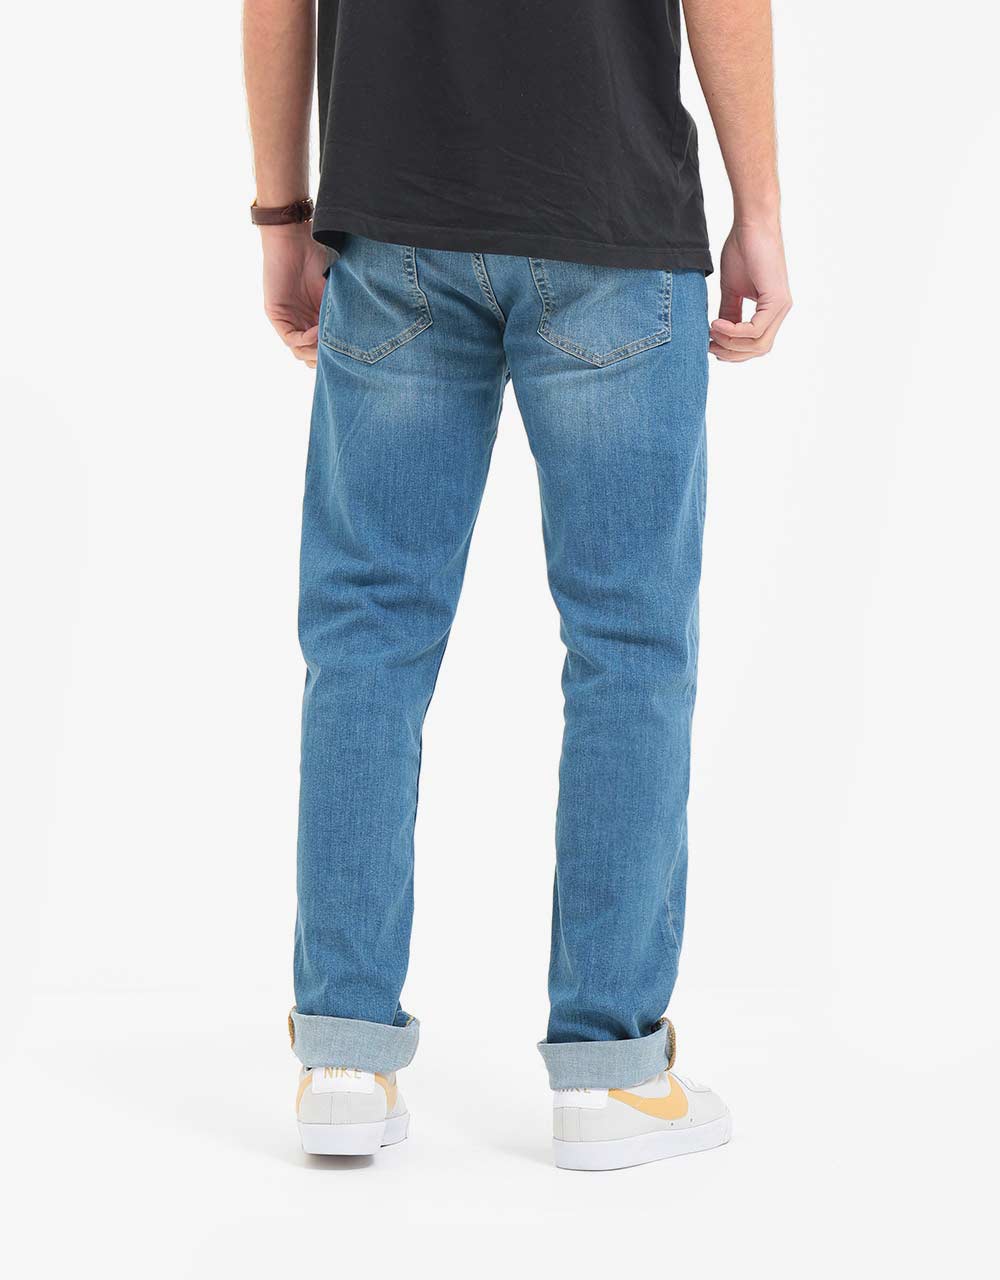 Route One Relaxed Denim Jeans - Washed Blue